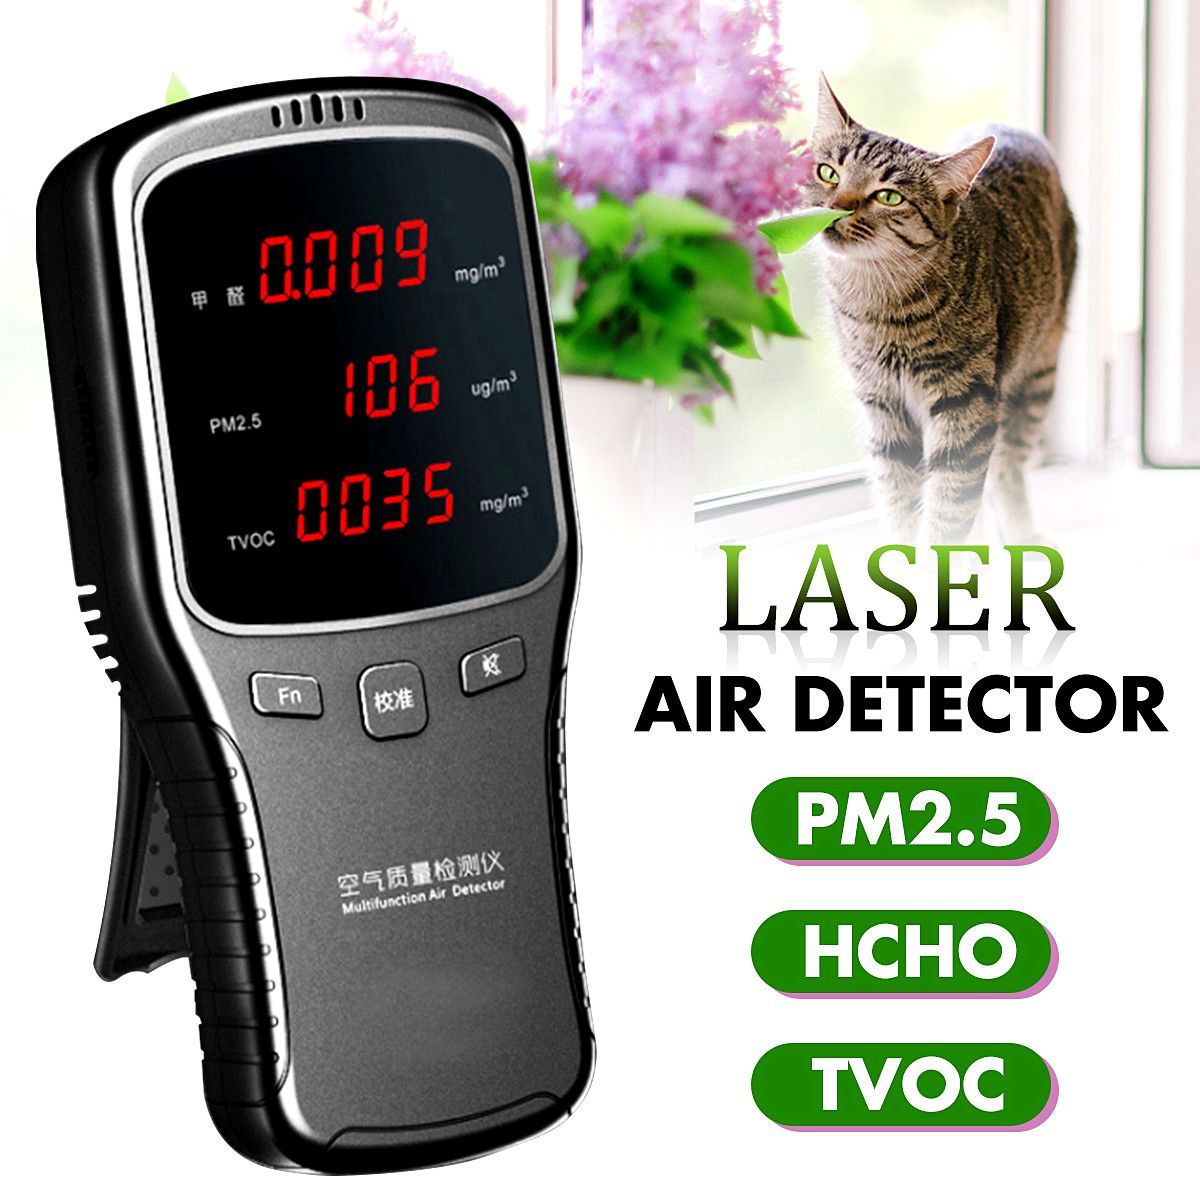 Household-Laser-PM25-Monitor-Formaldehyde-Detector-HCHO-TVOC-Air-Quality-1628422